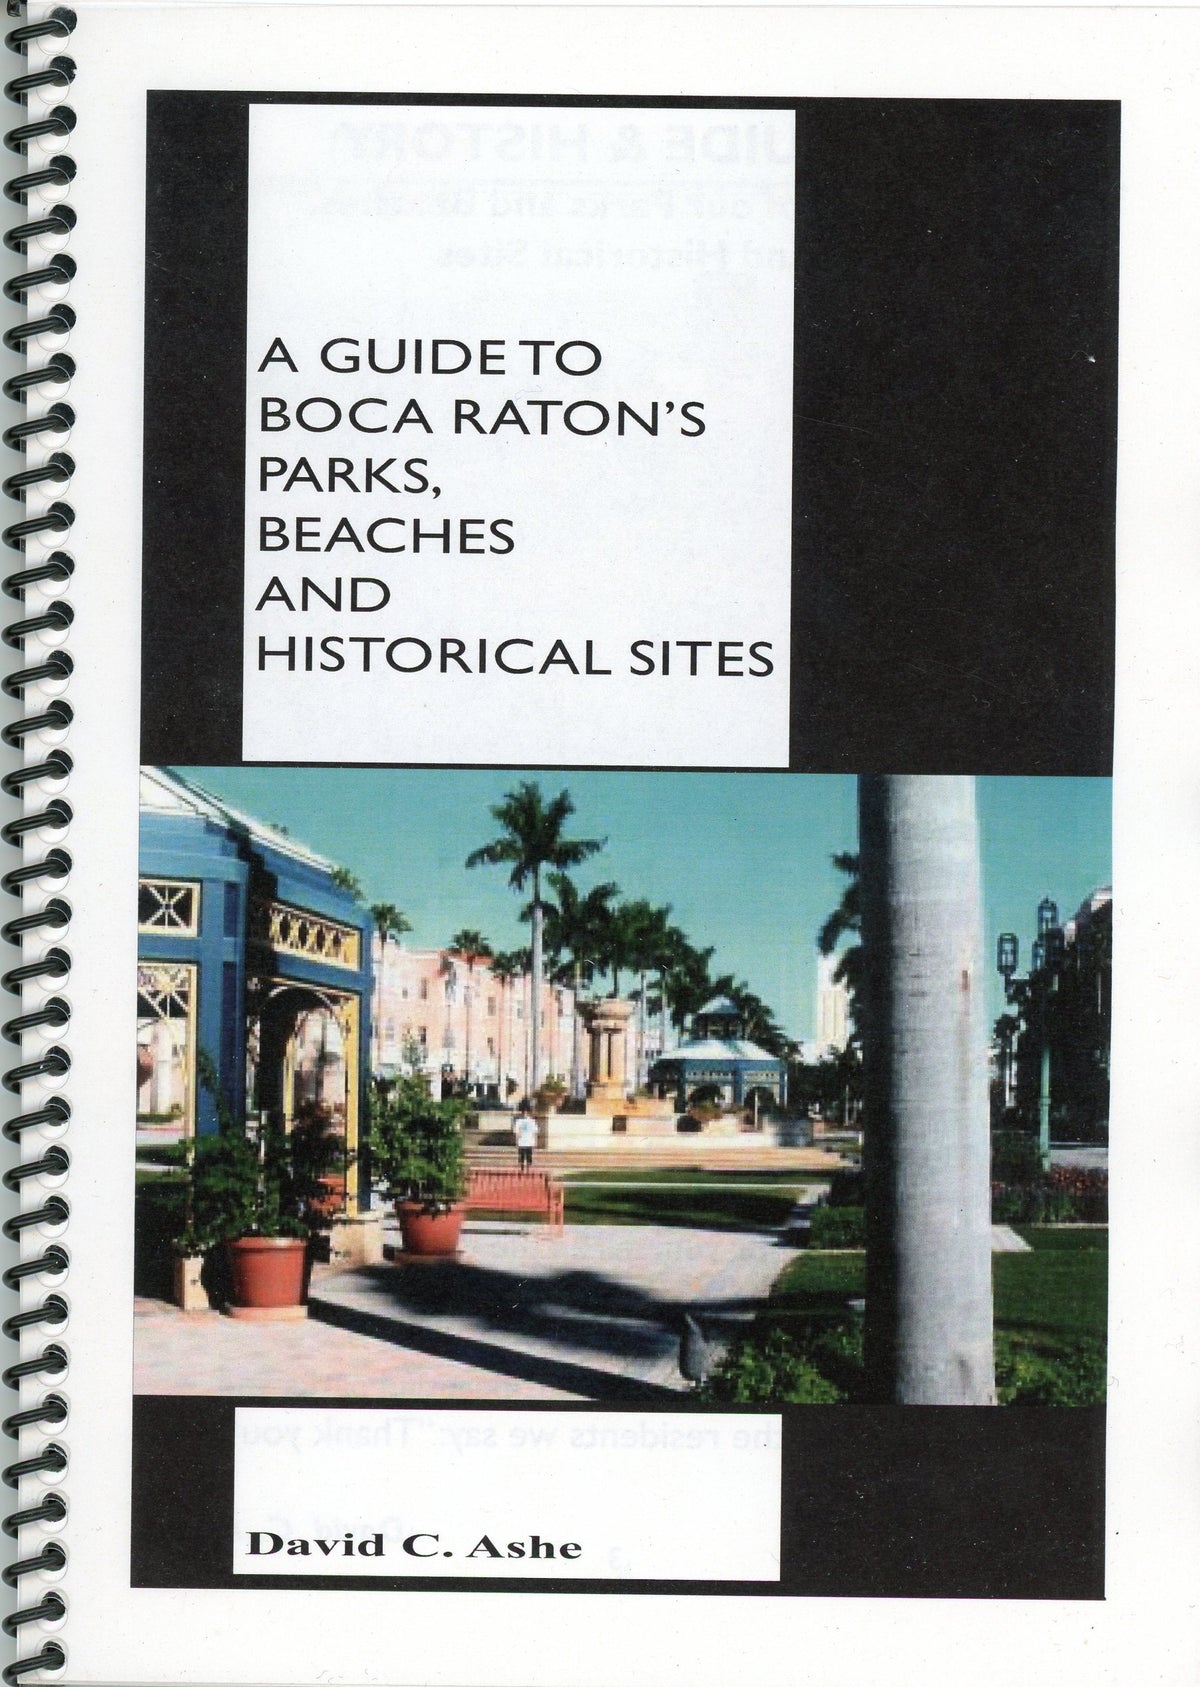 A Guide to Boca Raton's Parks, Beaches and Historical Sites